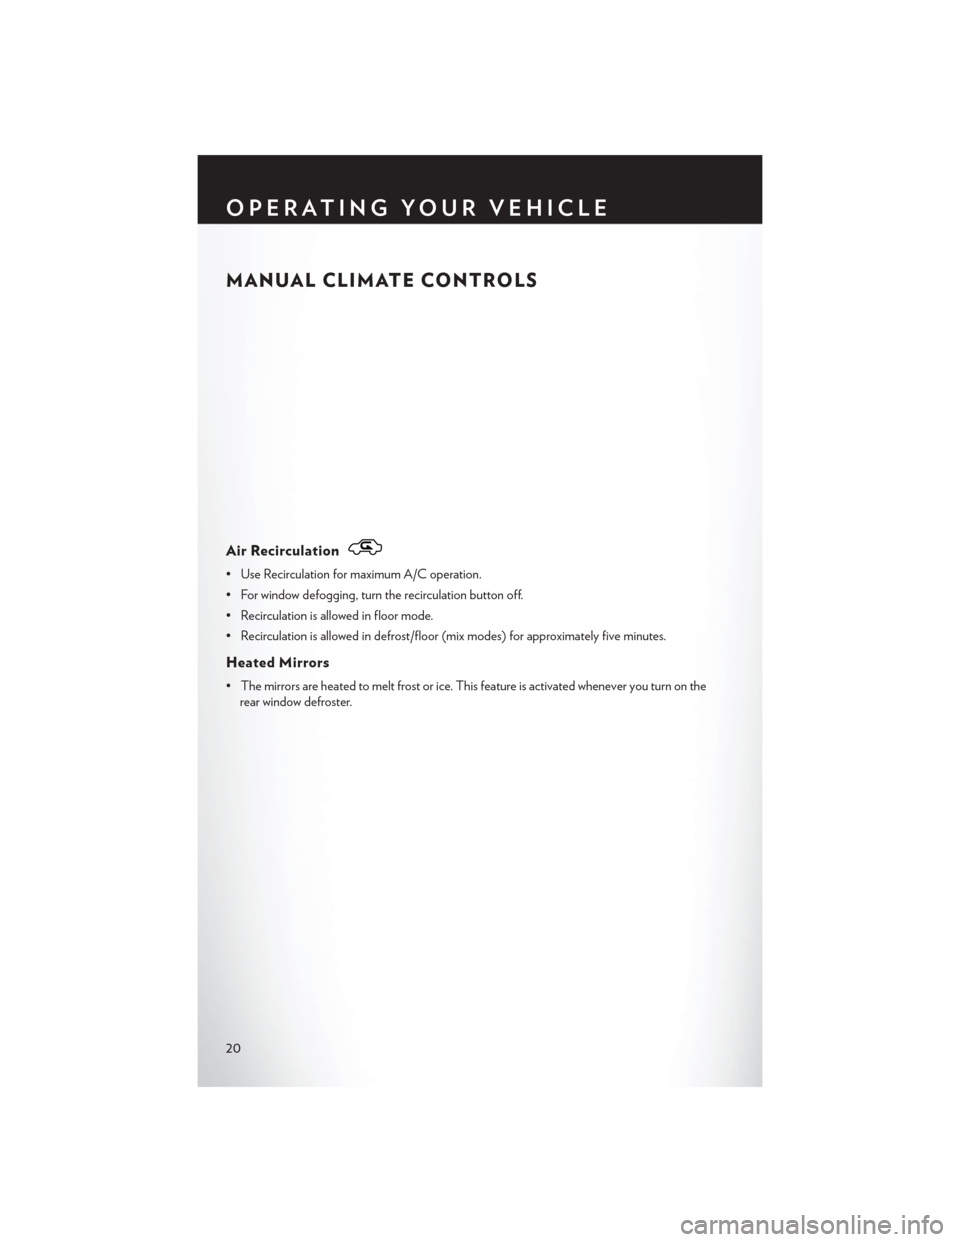 CHRYSLER 200 2013 1.G User Guide MANUAL CLIMATE CONTROLS
Air Recirculation
• Use Recirculation for maximum A/C operation.
• For window defogging, turn the recirculation button off.
• Recirculation is allowed in floor mode.
• 